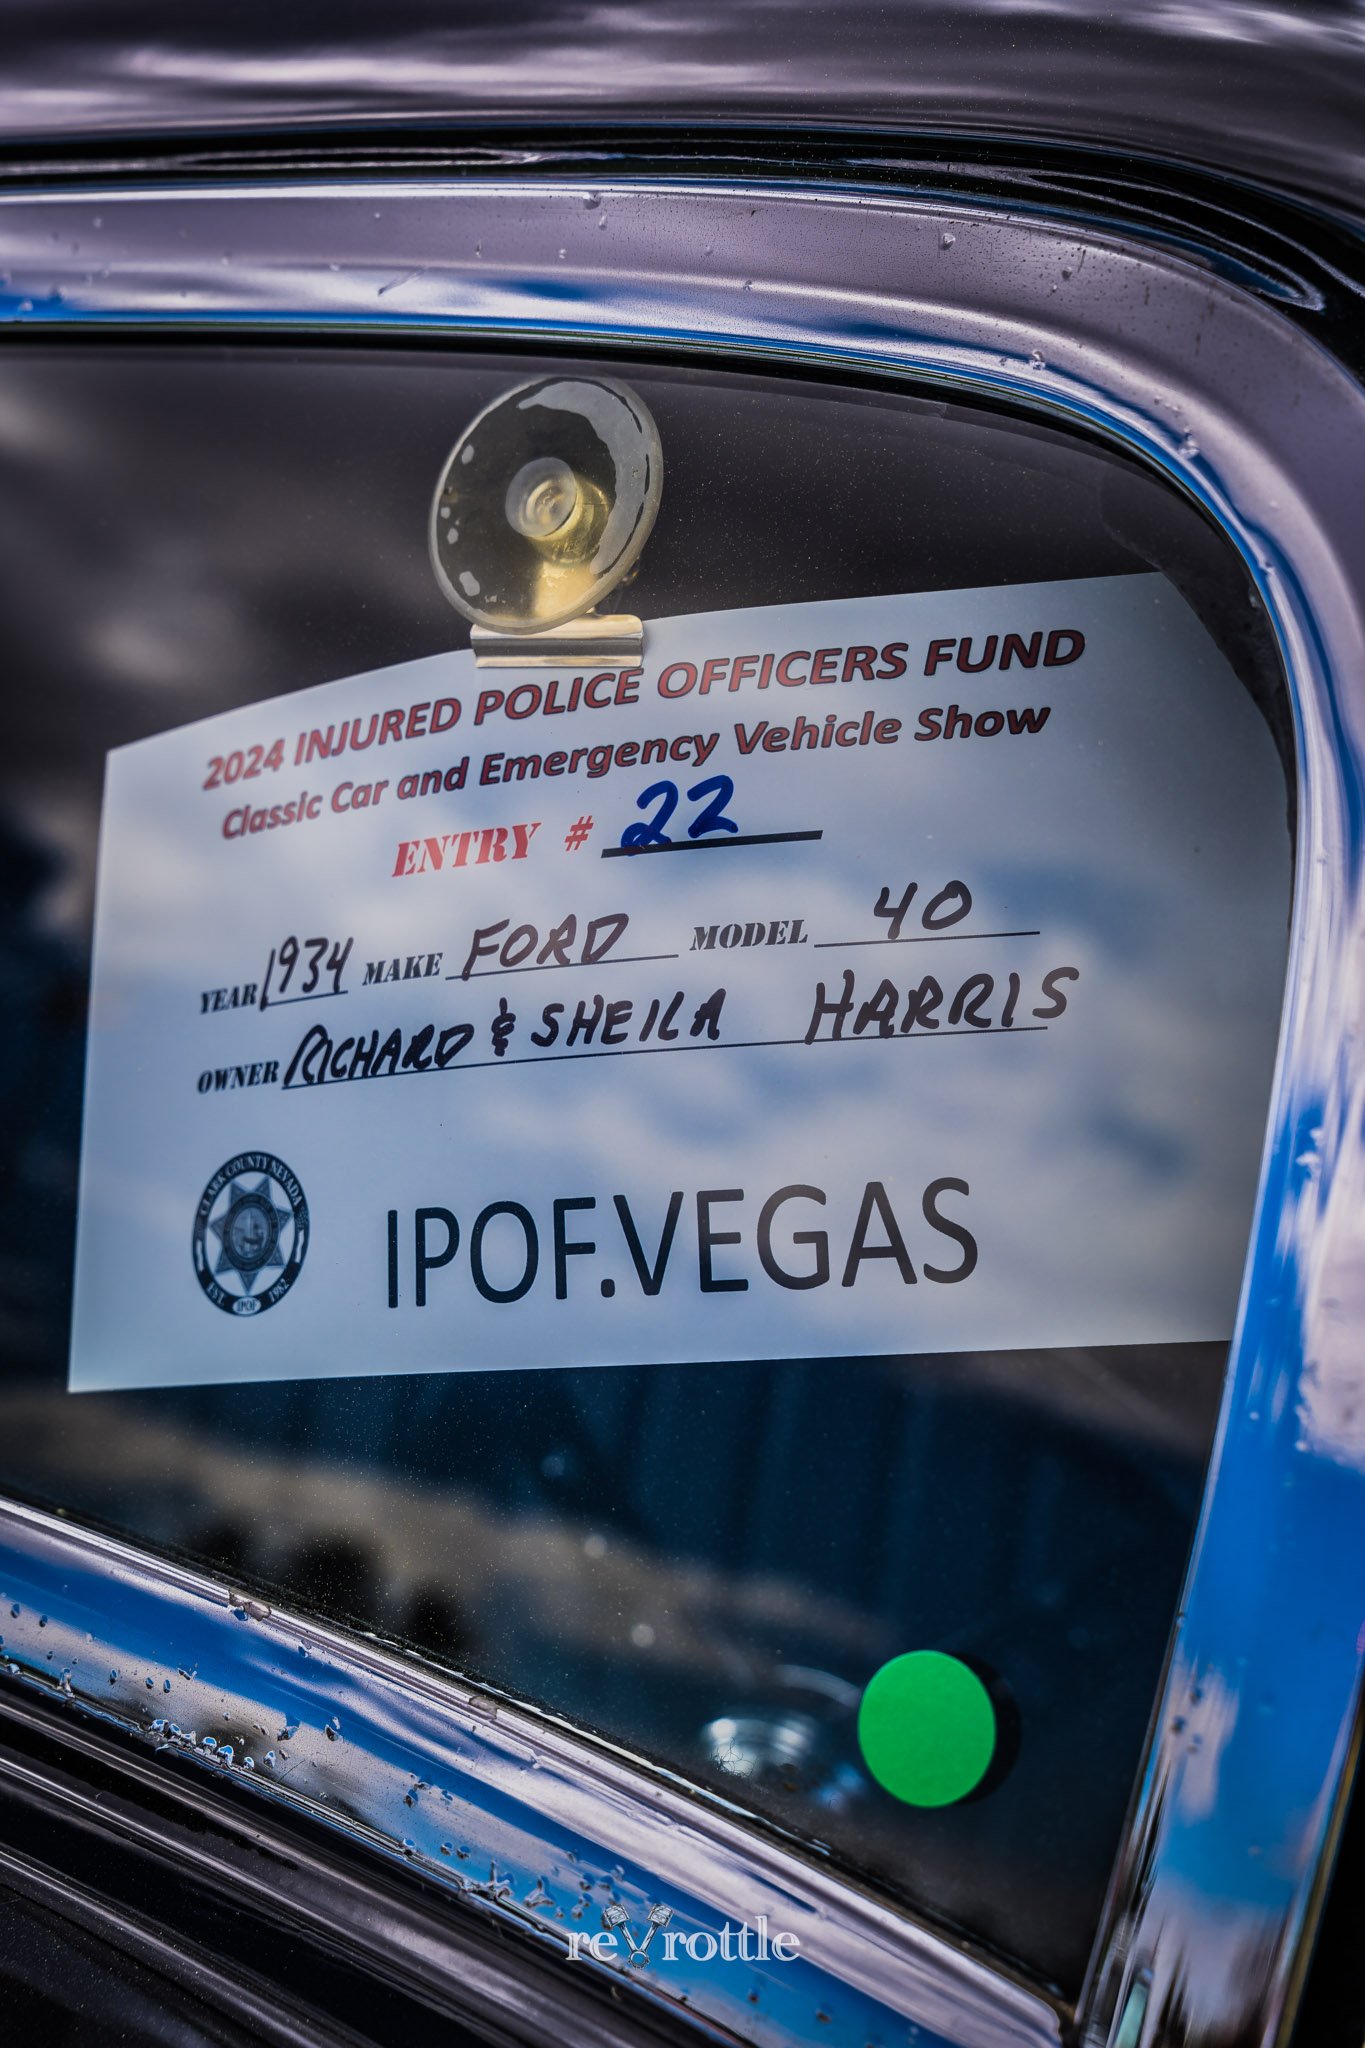 2024 Injured Police Officers Fund Classic Car Emergency Vehicle Show - March 23rd 2024-reVrottle-Vik-Chohan-Photography-Social-Media-545.jpg